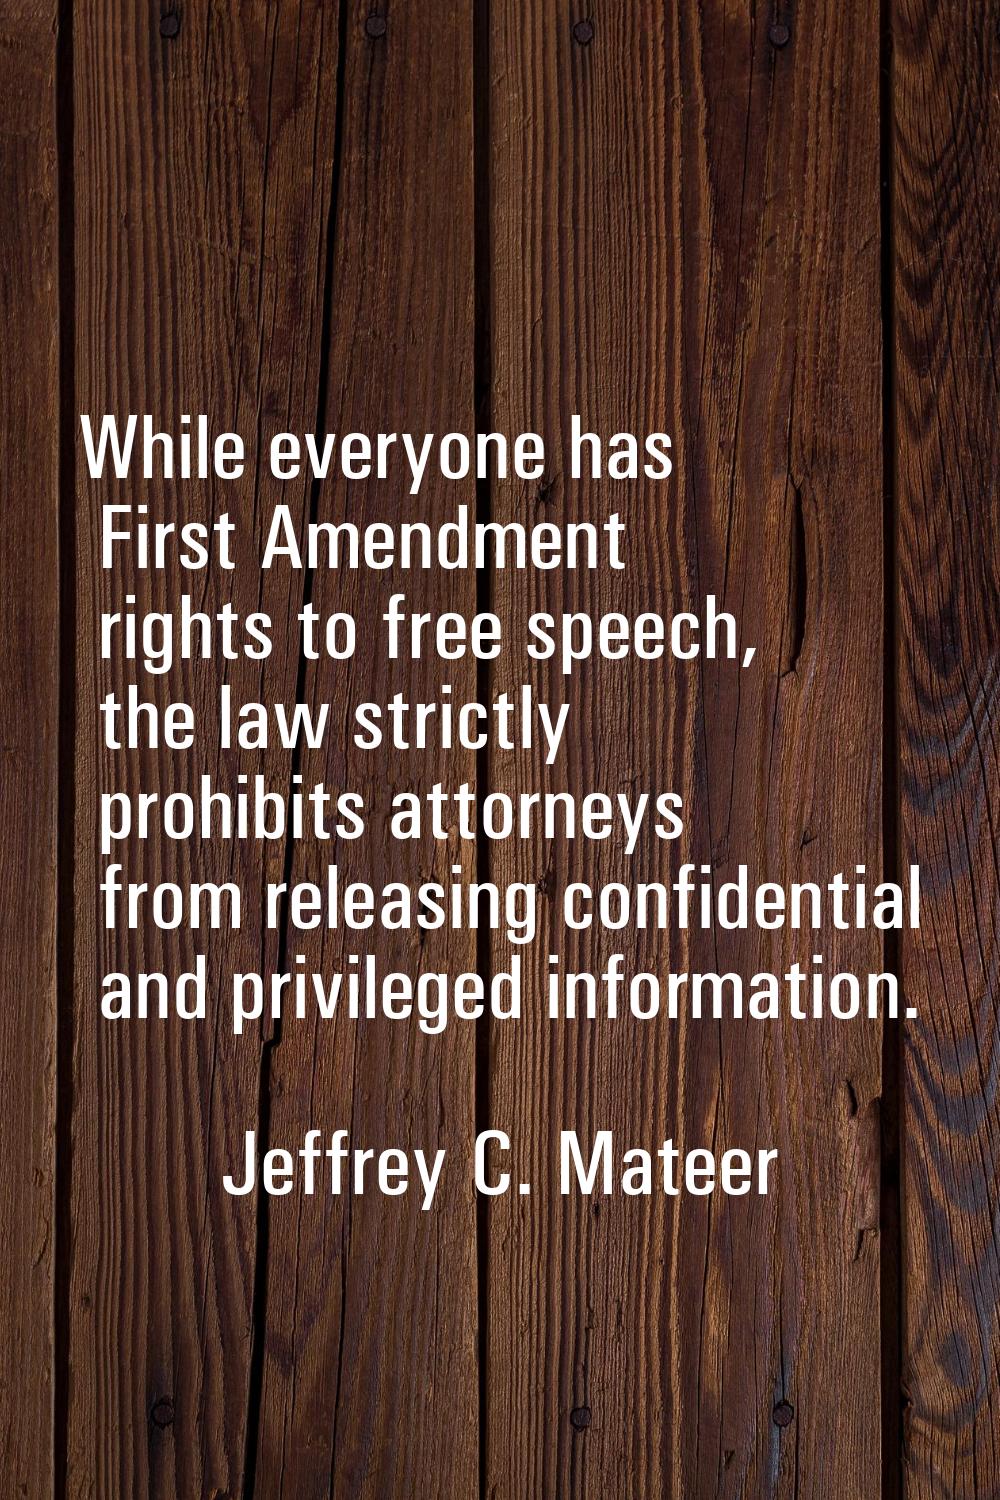 While everyone has First Amendment rights to free speech, the law strictly prohibits attorneys from